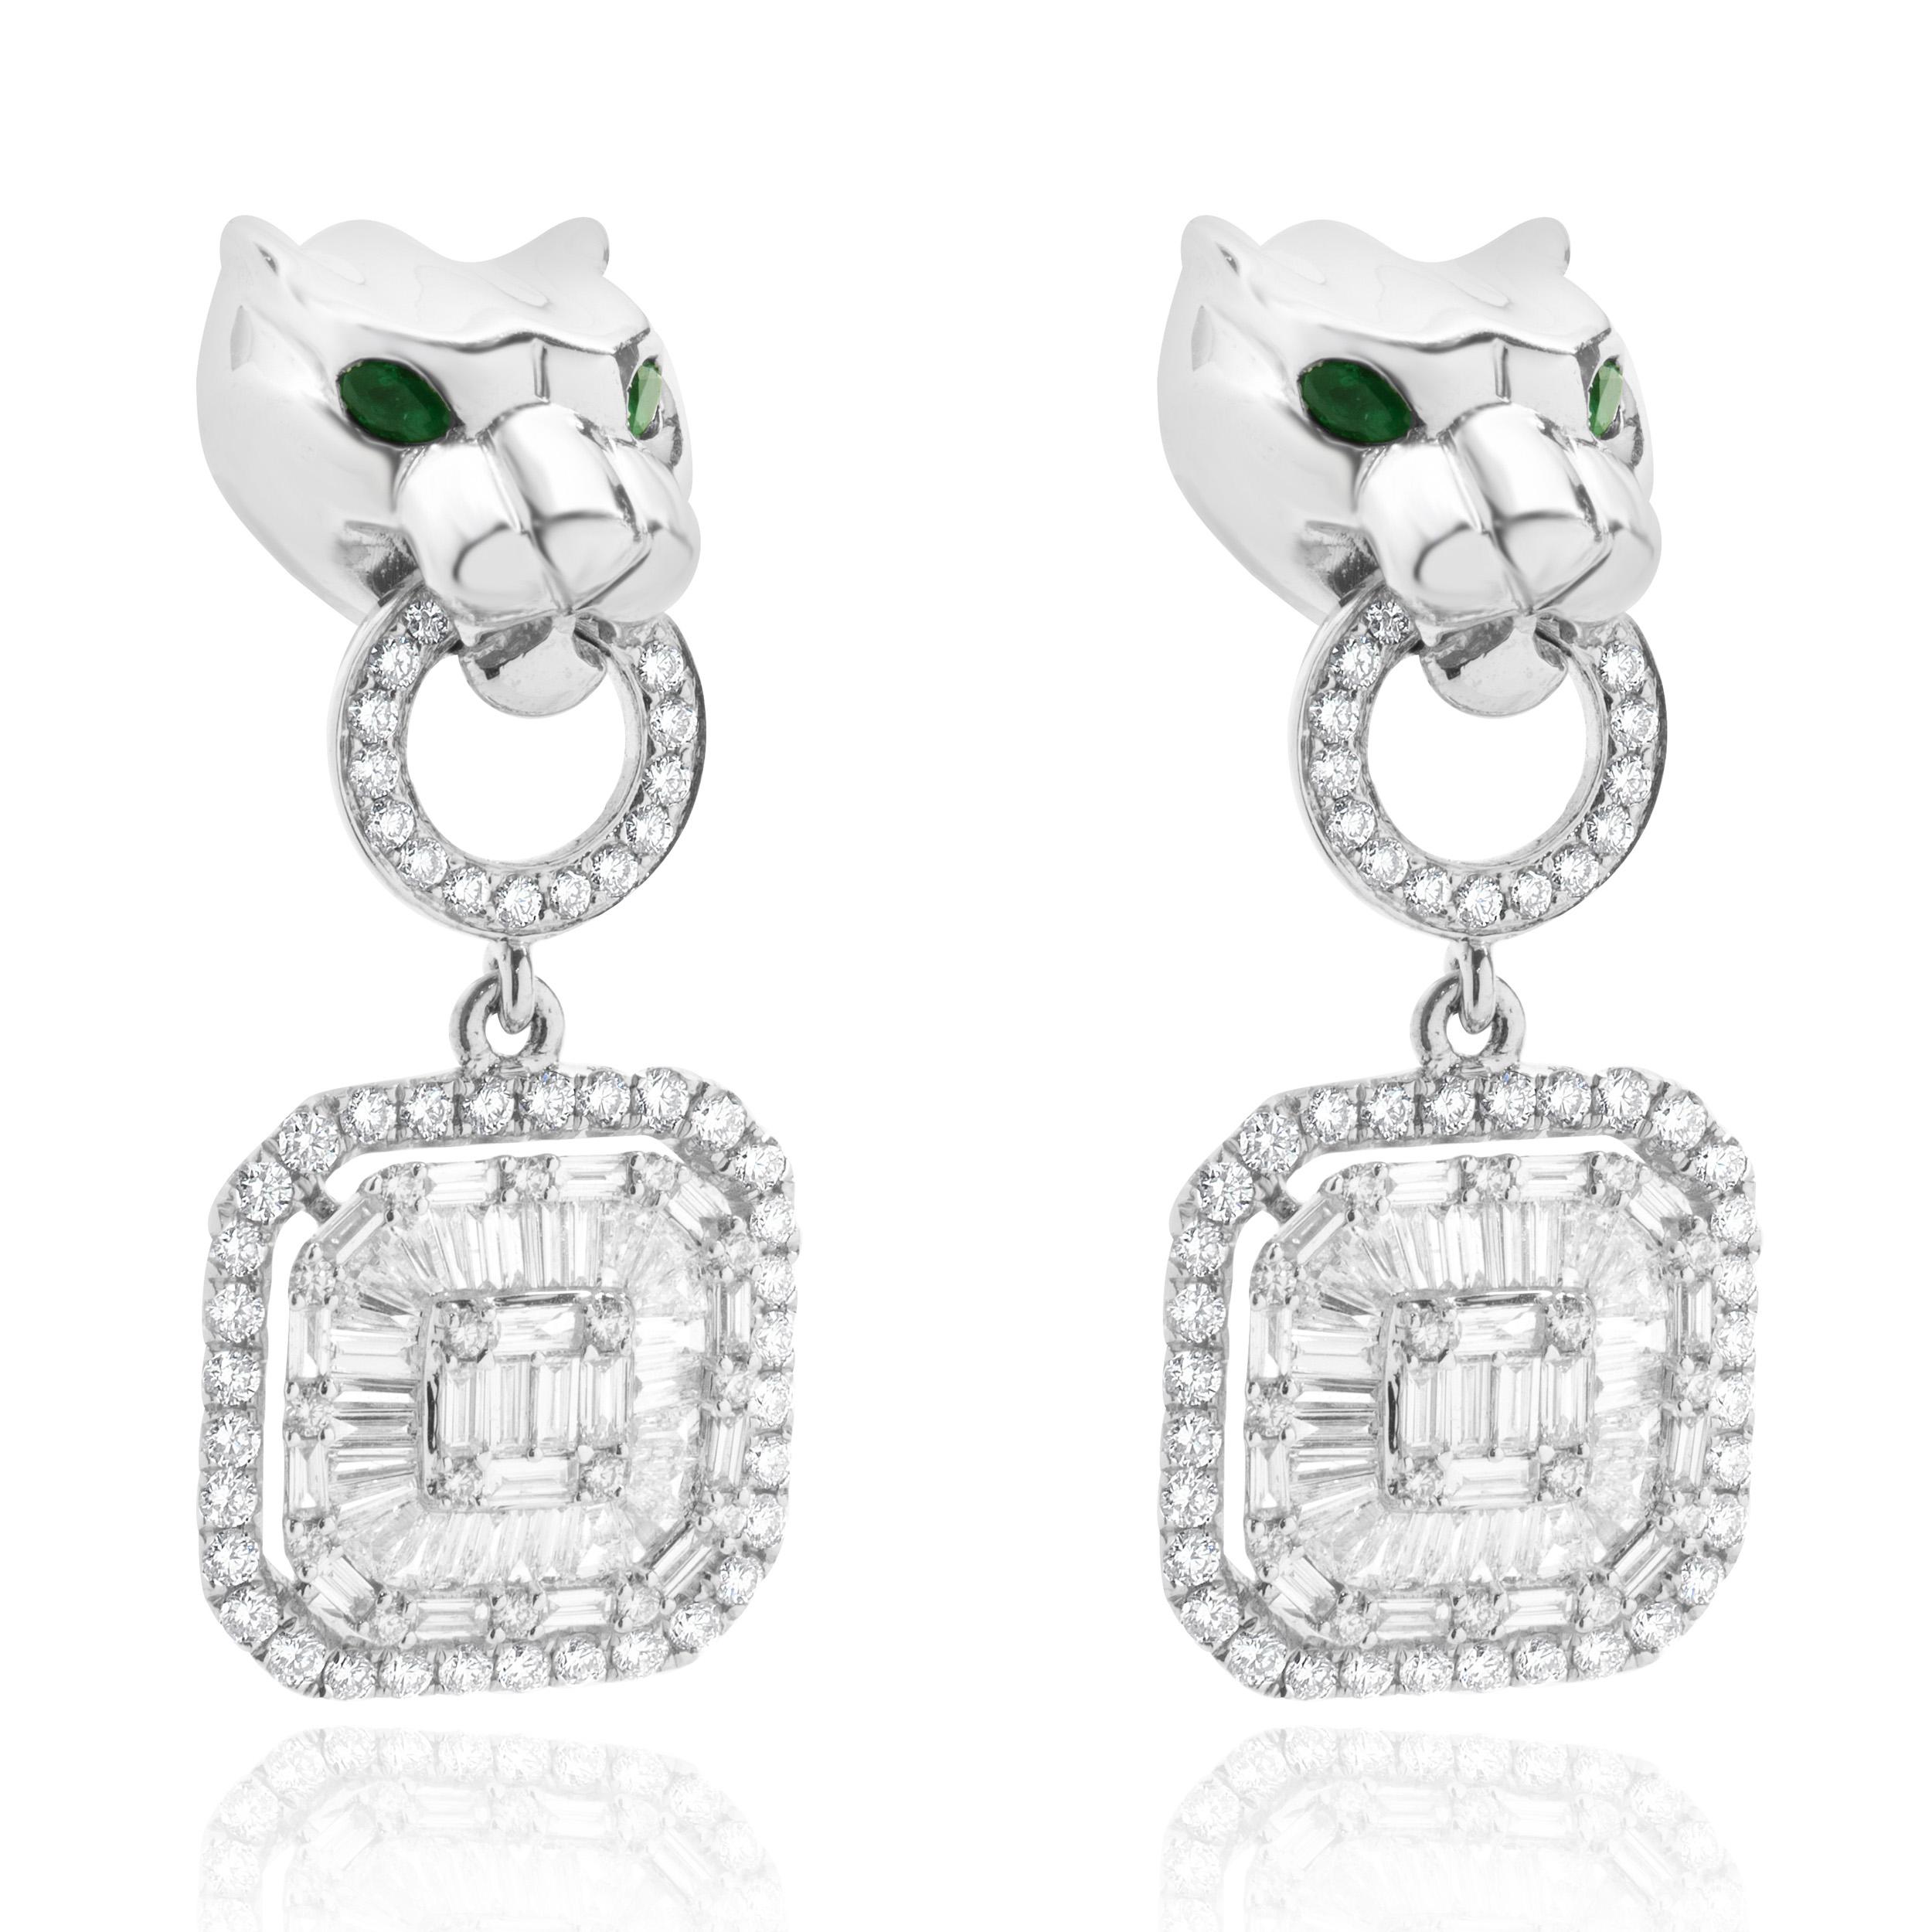 18 Karat White Gold Panther Mosaic Set Diamond Drop Earrings In Excellent Condition For Sale In Scottsdale, AZ